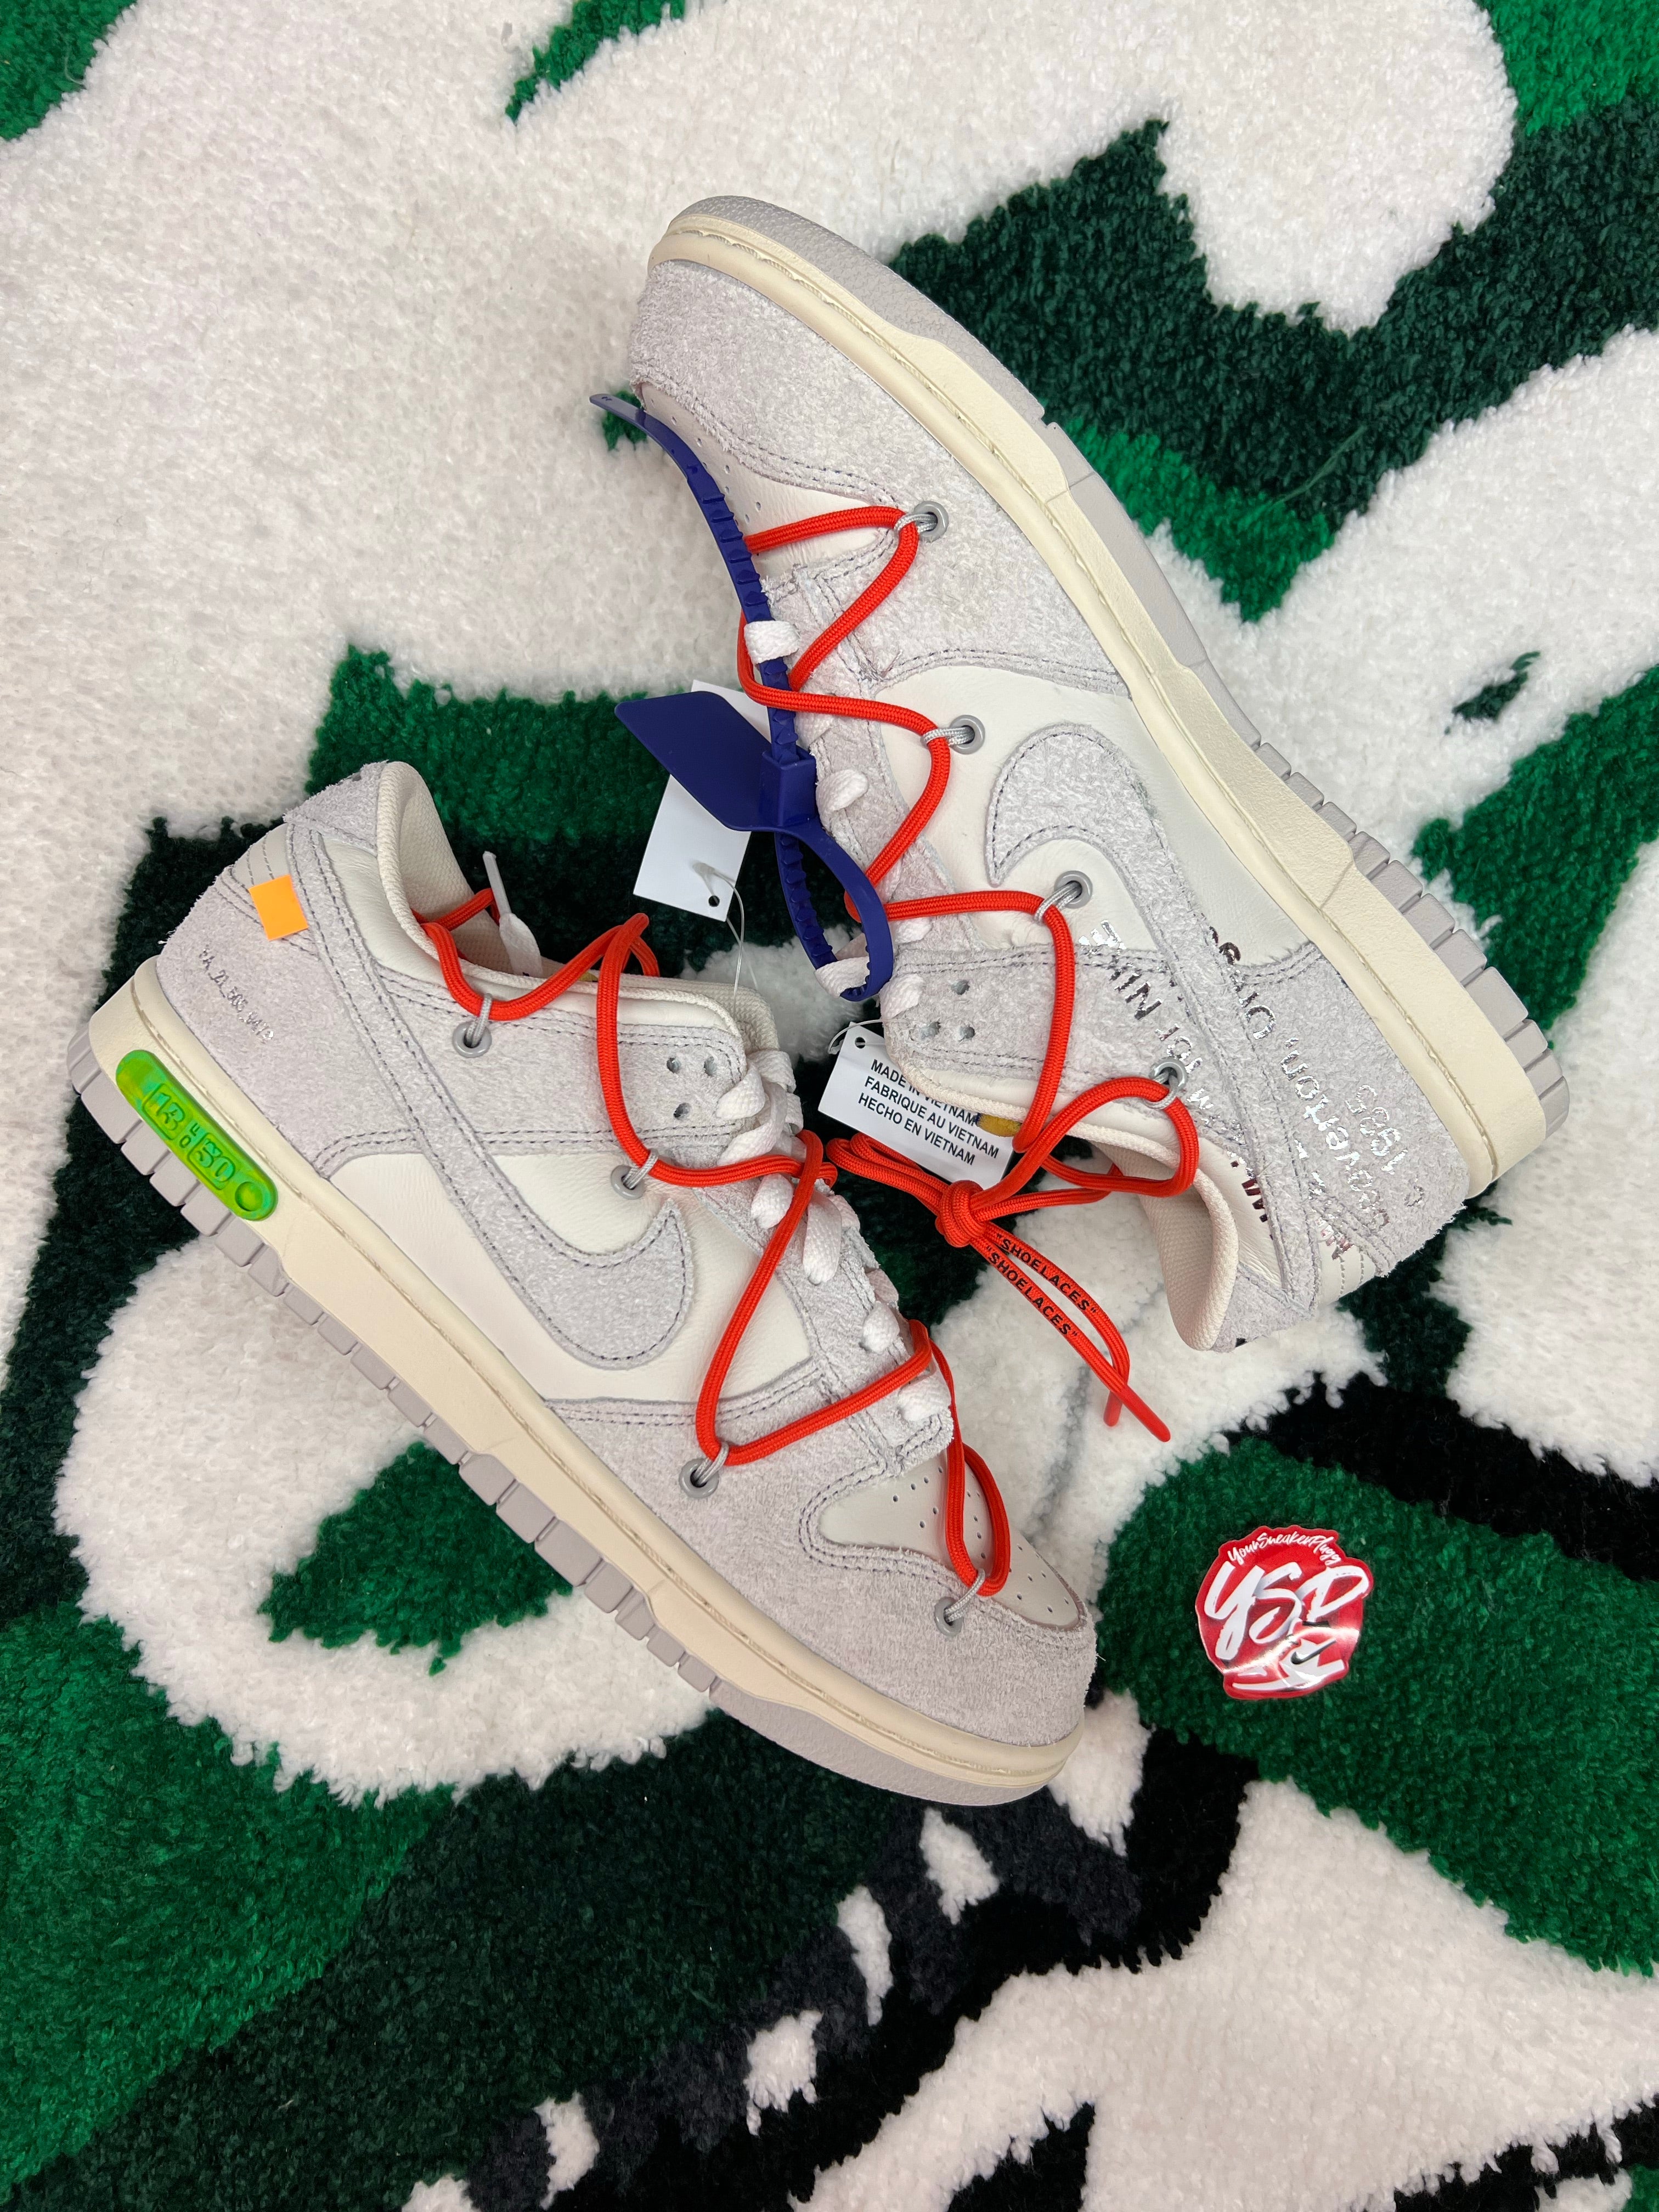 Nike off-white dunk low lot 13 Of 50 Exclusive Release Size 8.5